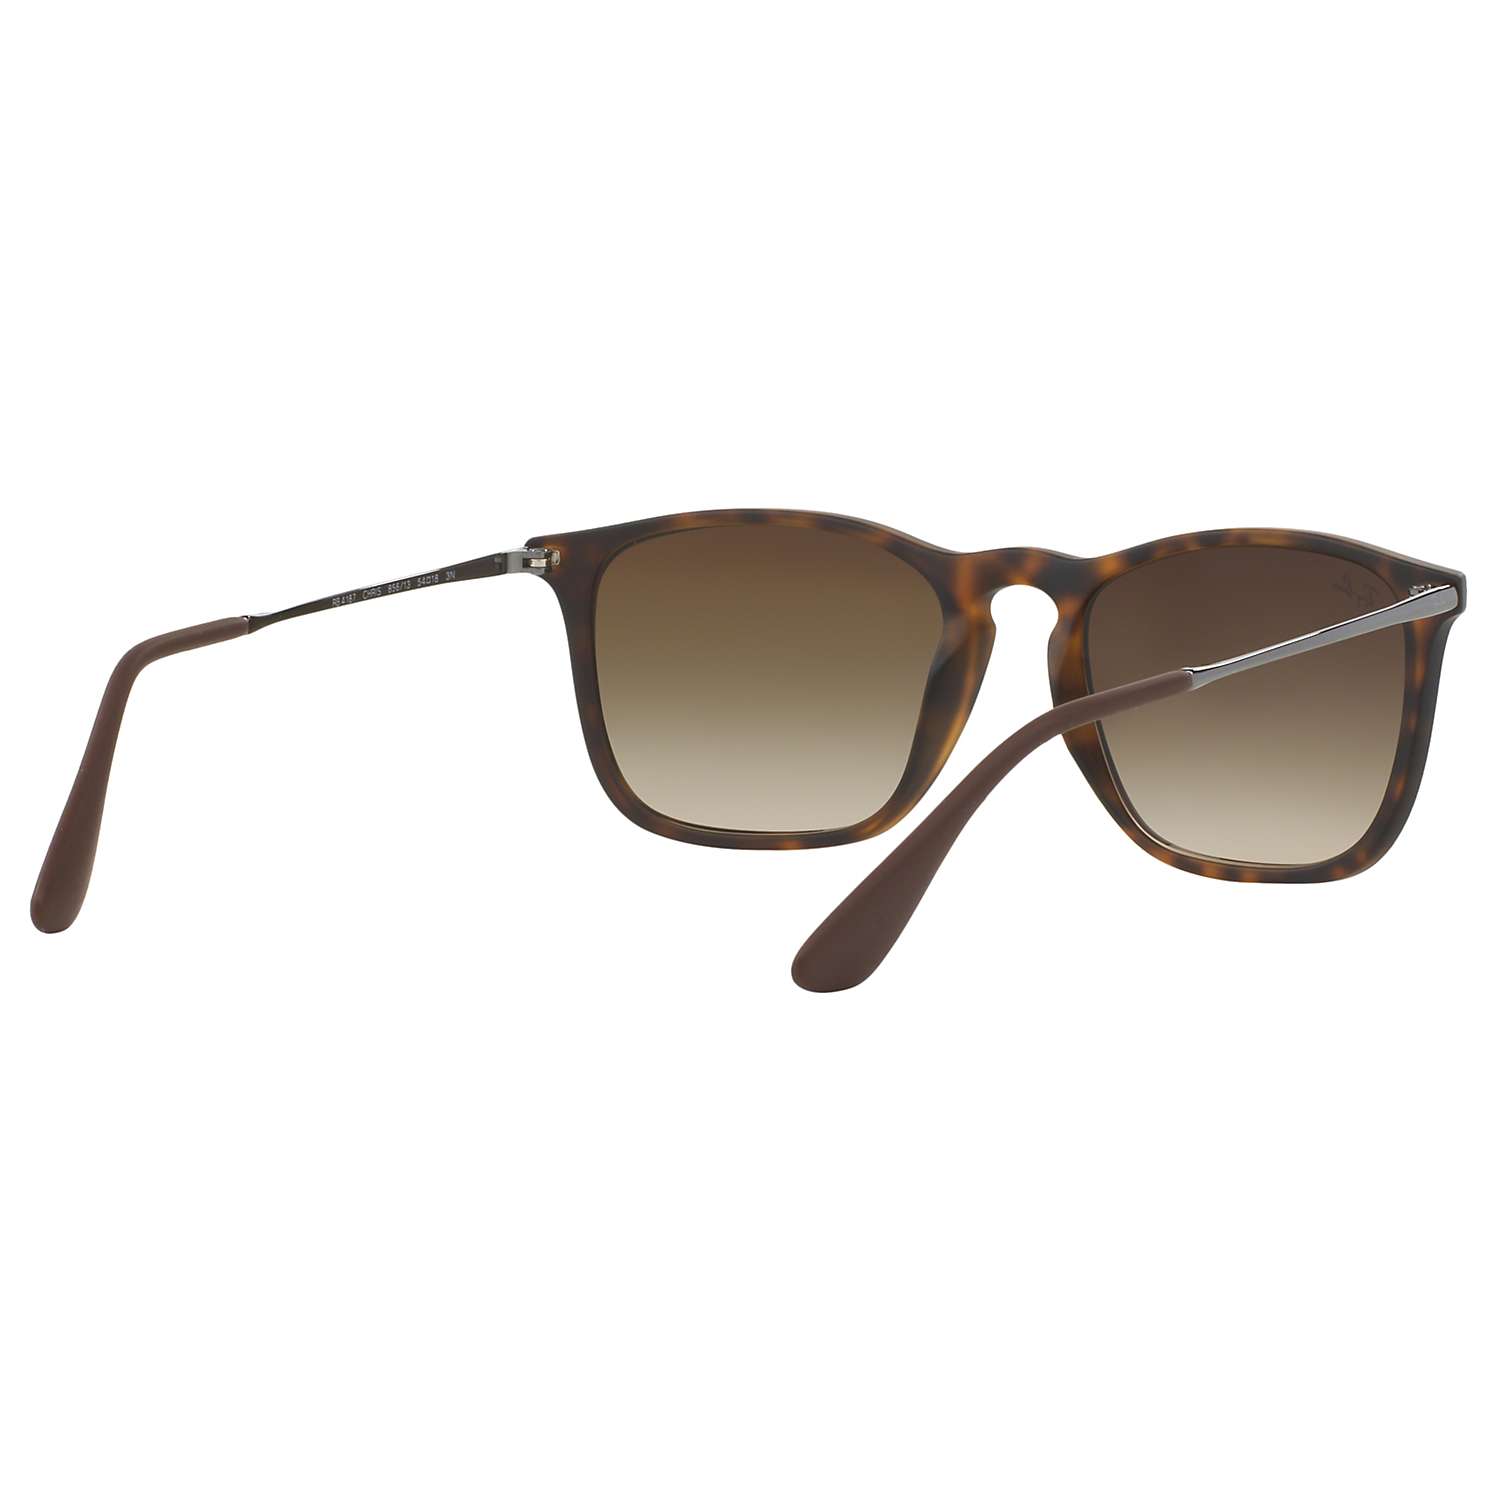 Buy Ray-Ban RB4187 Chris Square Sunglasses Online at johnlewis.com